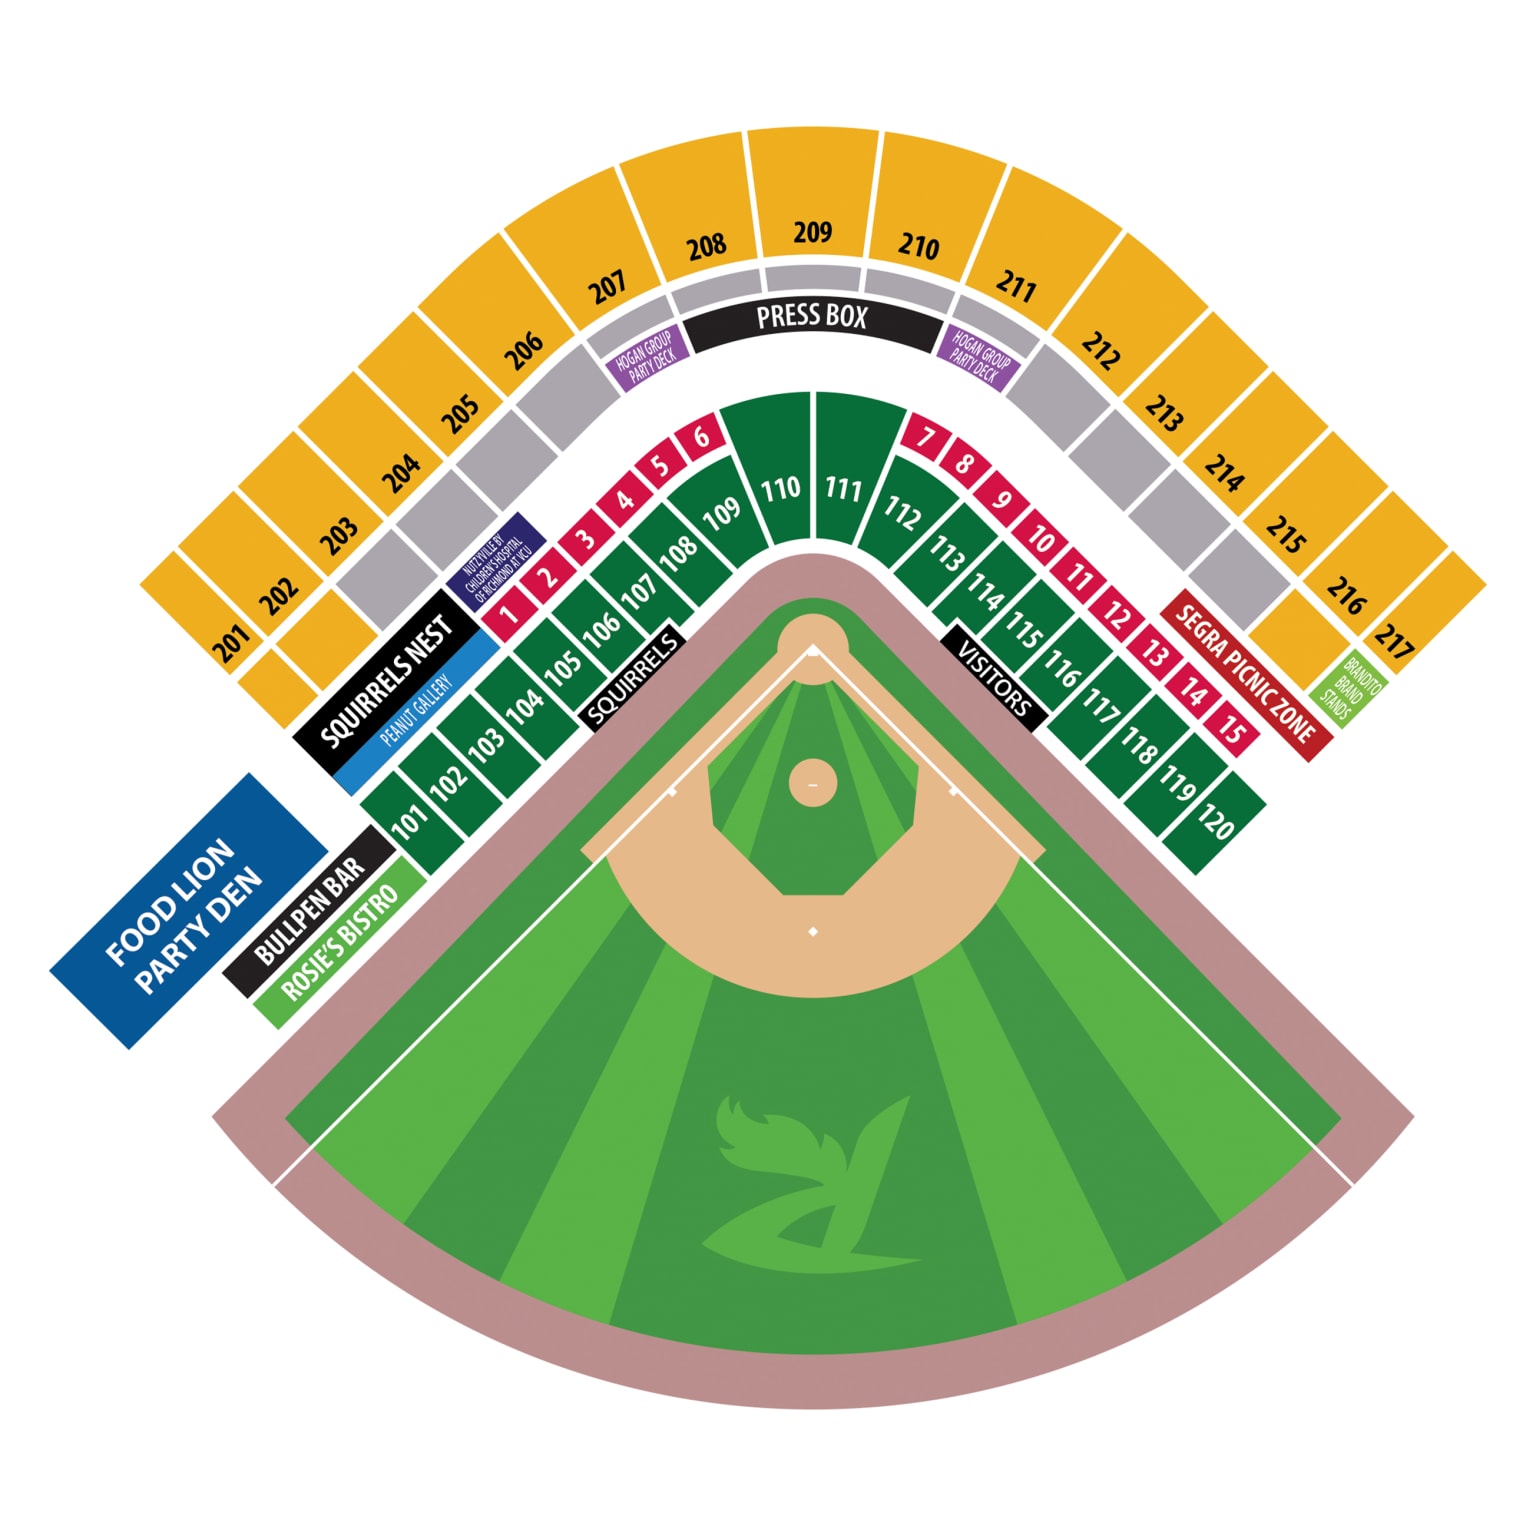 Seating Chart The Diamond Flying Squirrels